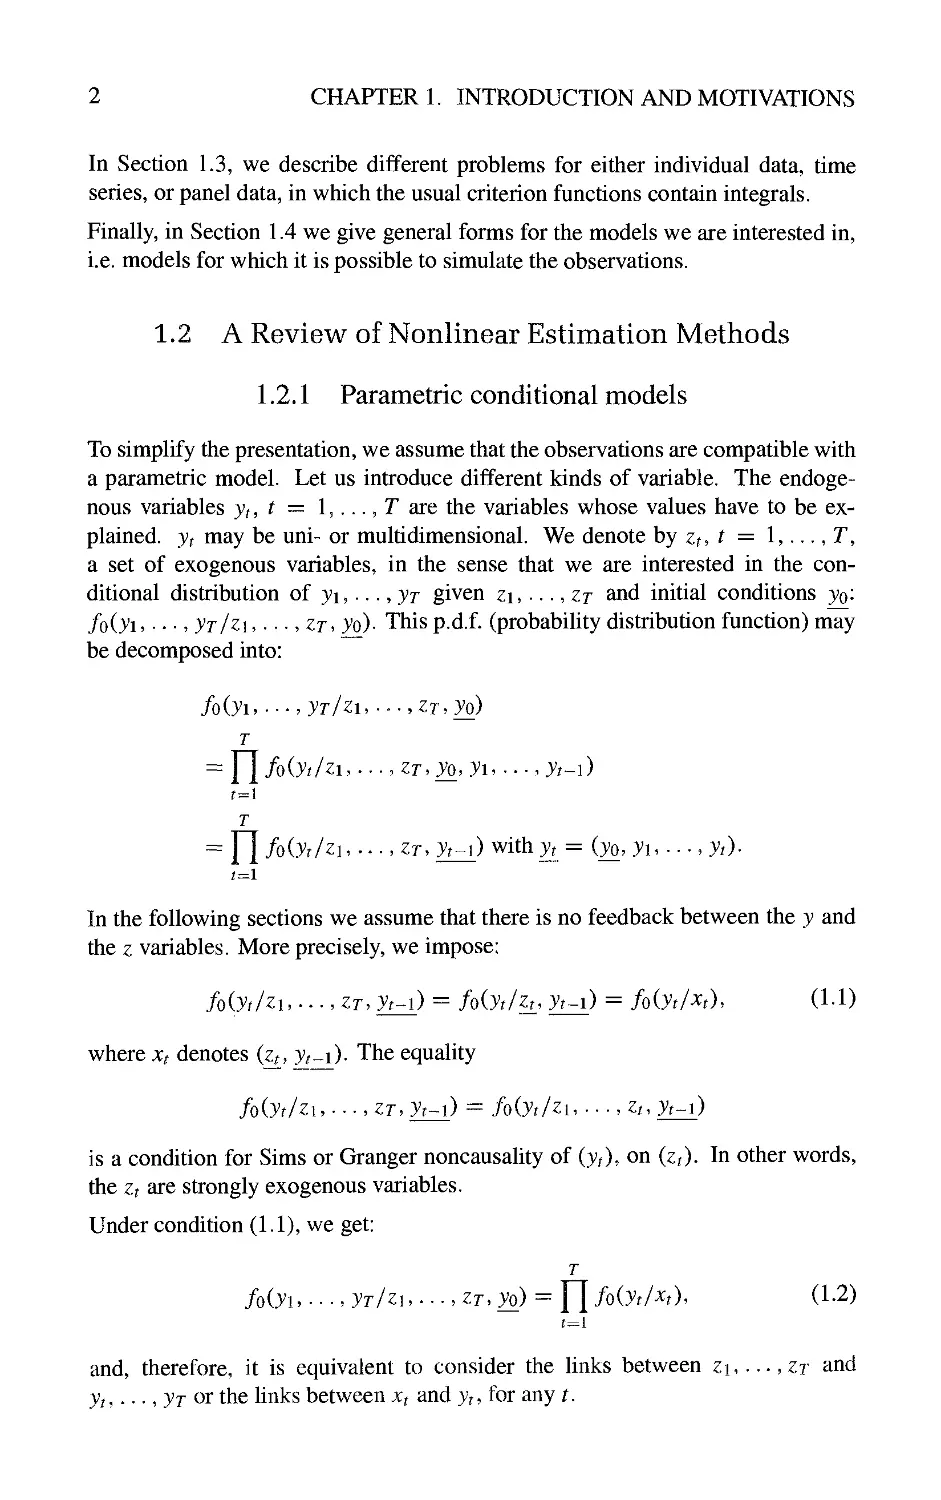 1.2 A Review of Nonlinear Estimation Methods